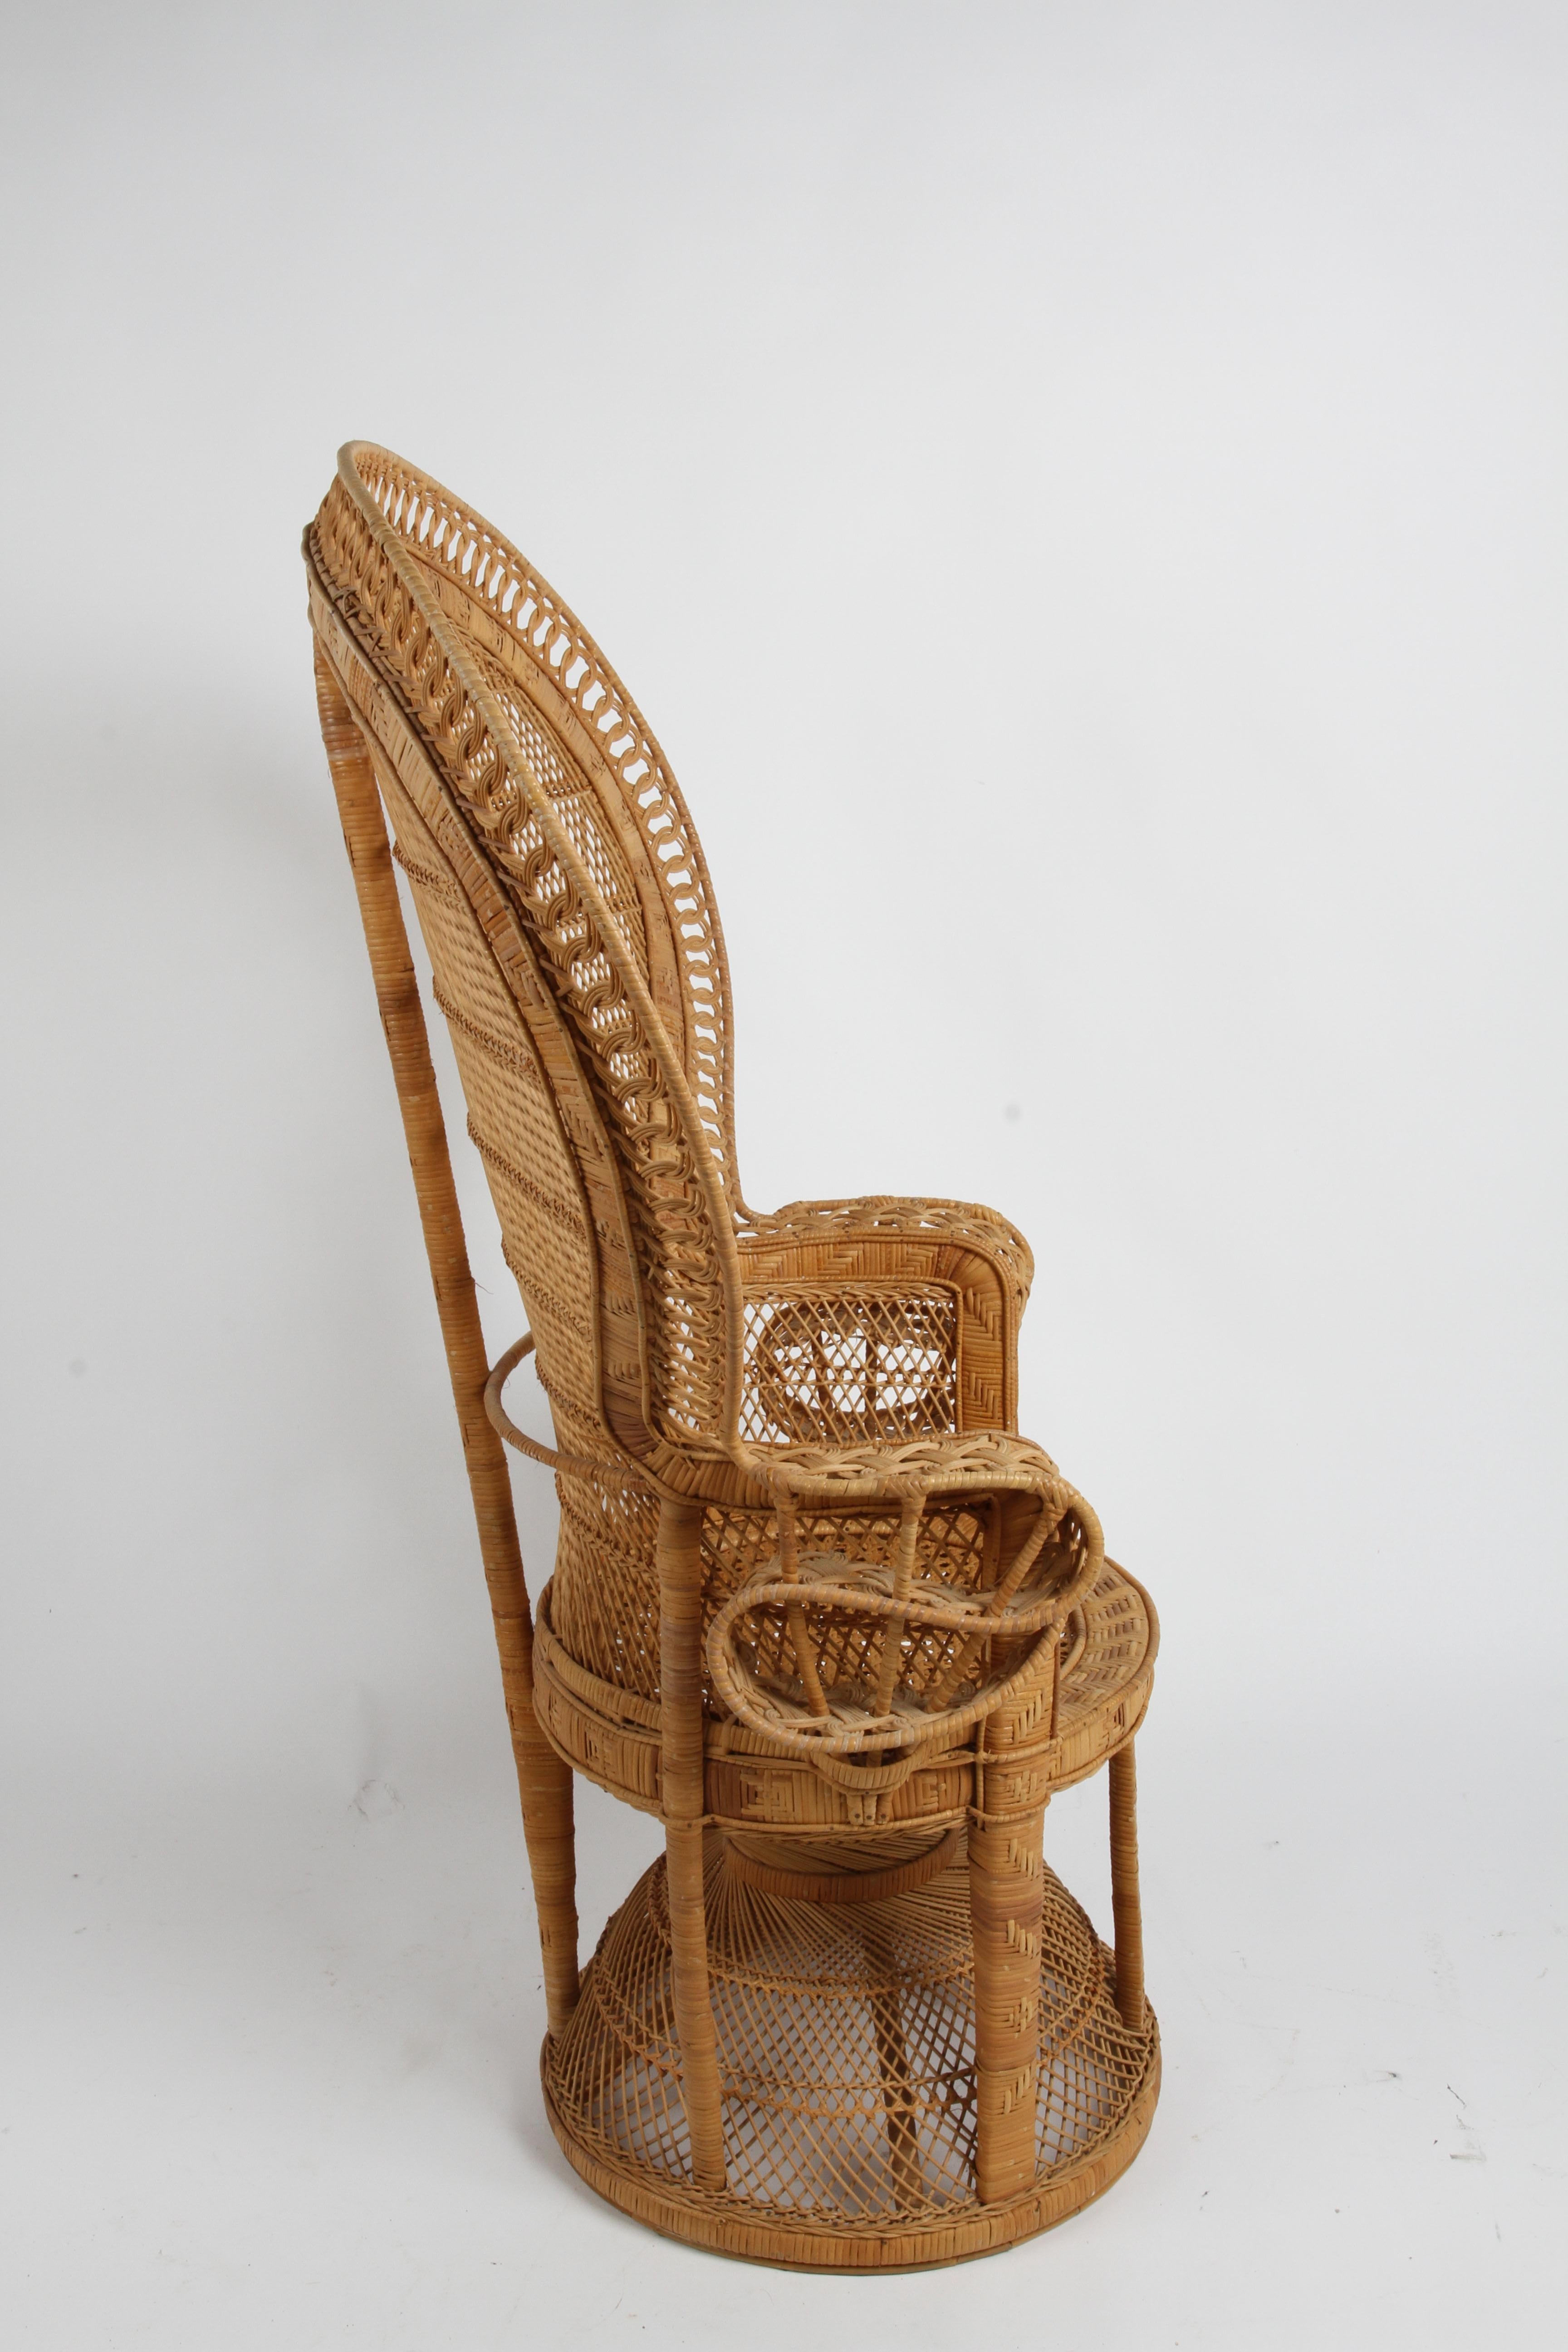 Vintage 1970s Rattan & Wicker Handcrafted Boho Chic Emmanuelle Peacock Chair 3